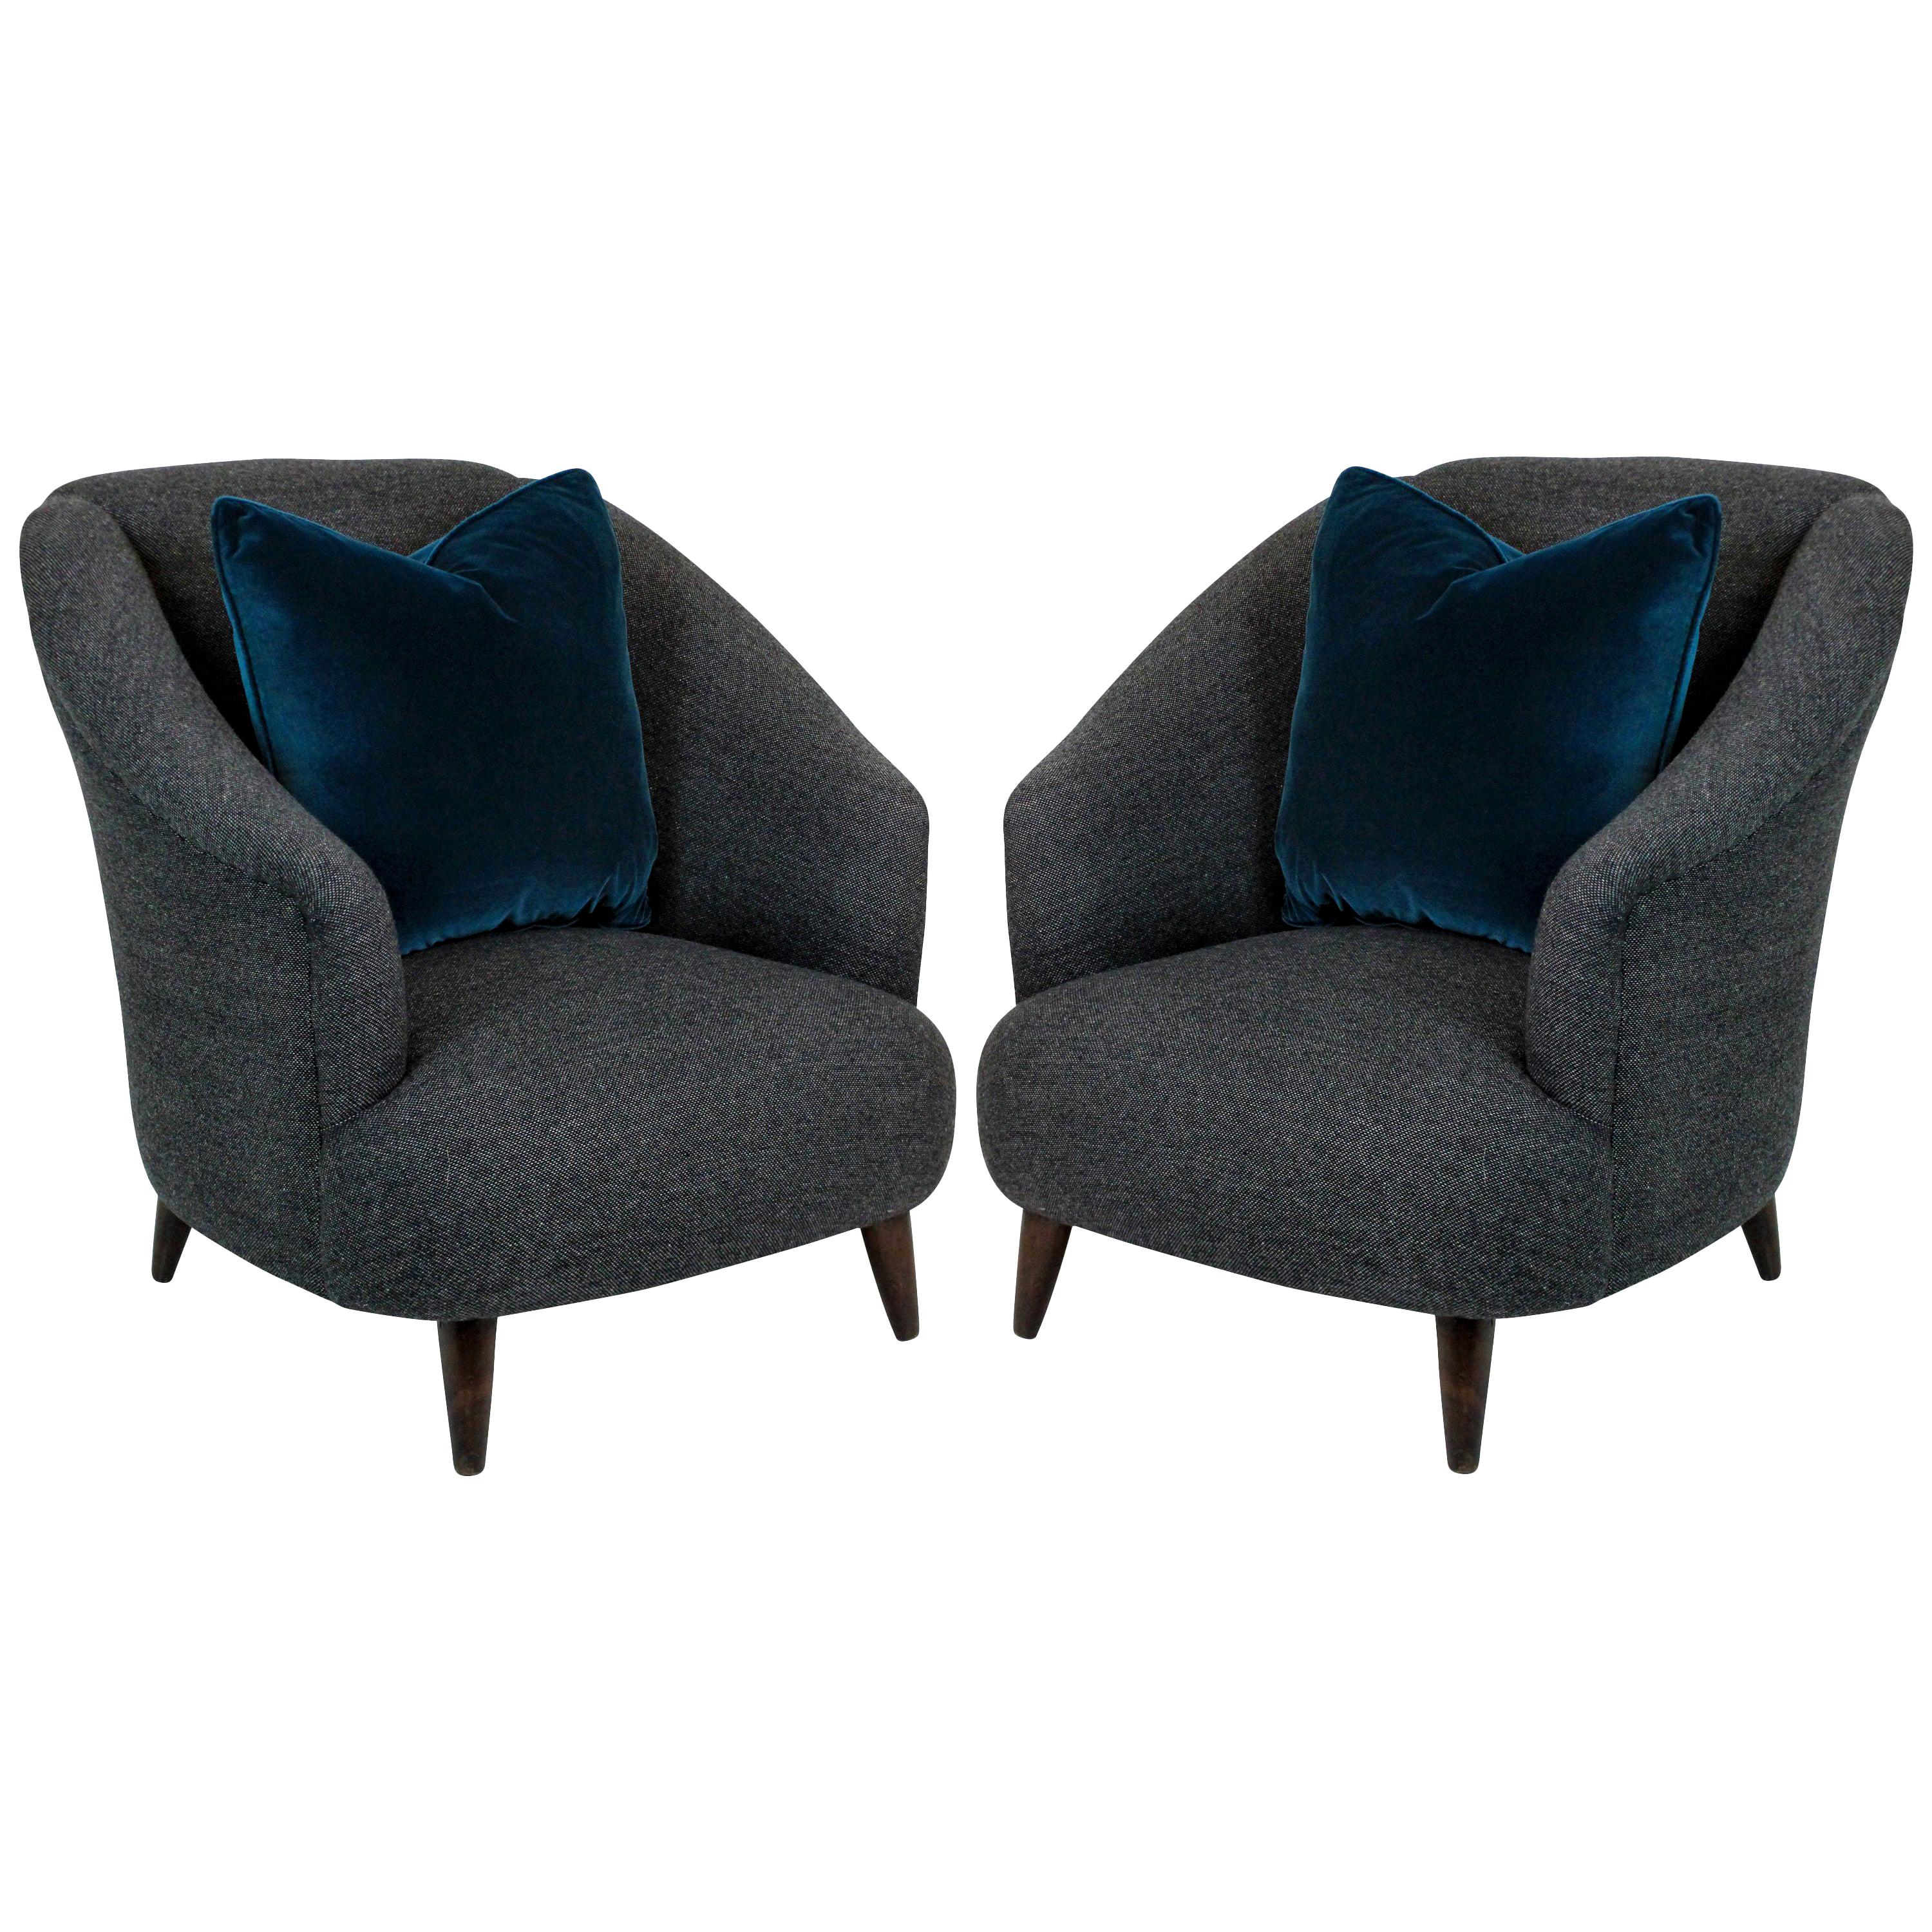 Pair of Comfortable Ulrich Lounge Chairs